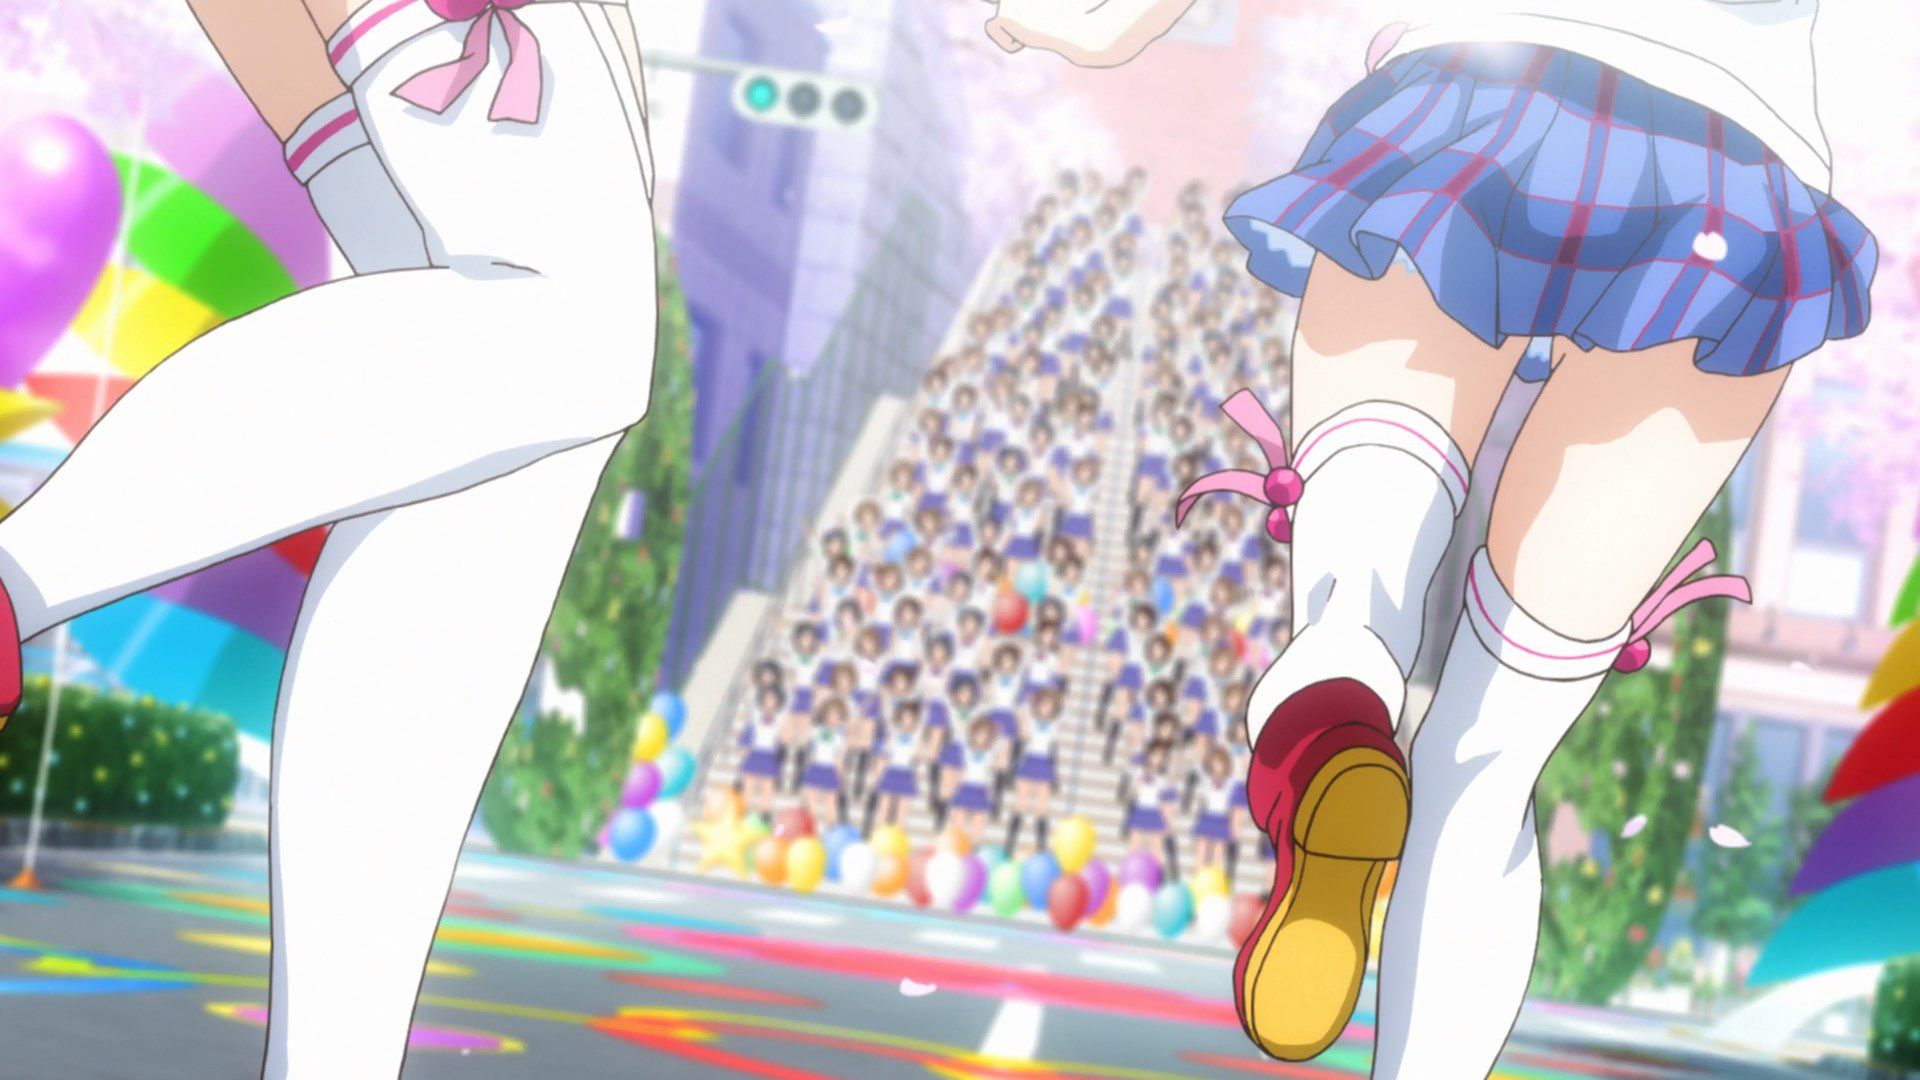 [God images] "love live! ' Μm ' PV's leg is too erotic everyone wakes up to a leg fetish of wwwww 81